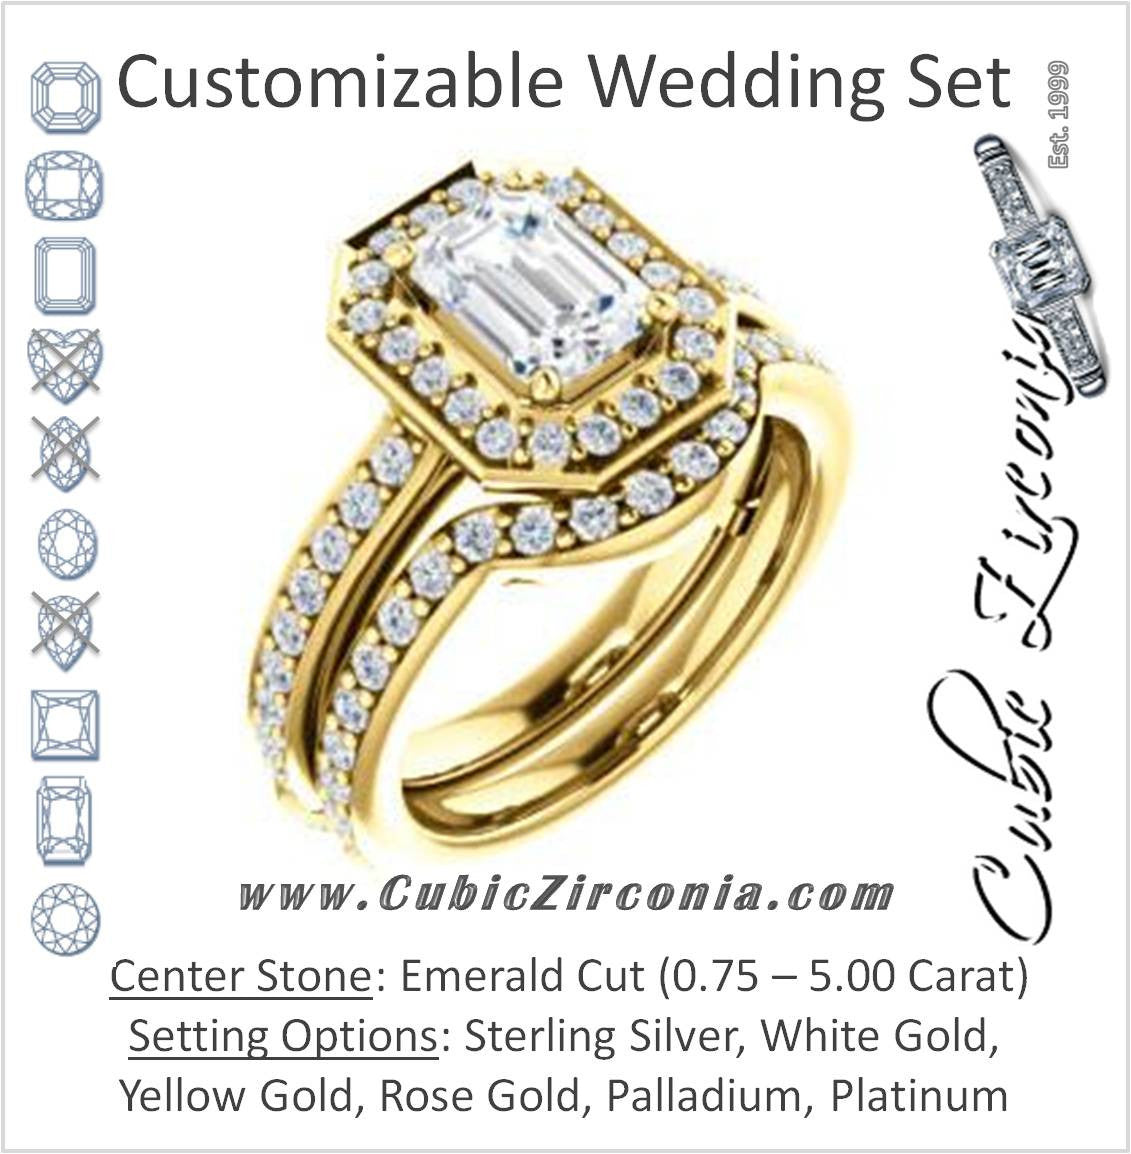 CZ Wedding Set, featuring The Sally engagement ring (Customizable Halo-Emerald Cut Design with Round Side Knuckle and Pavé Band Accents)